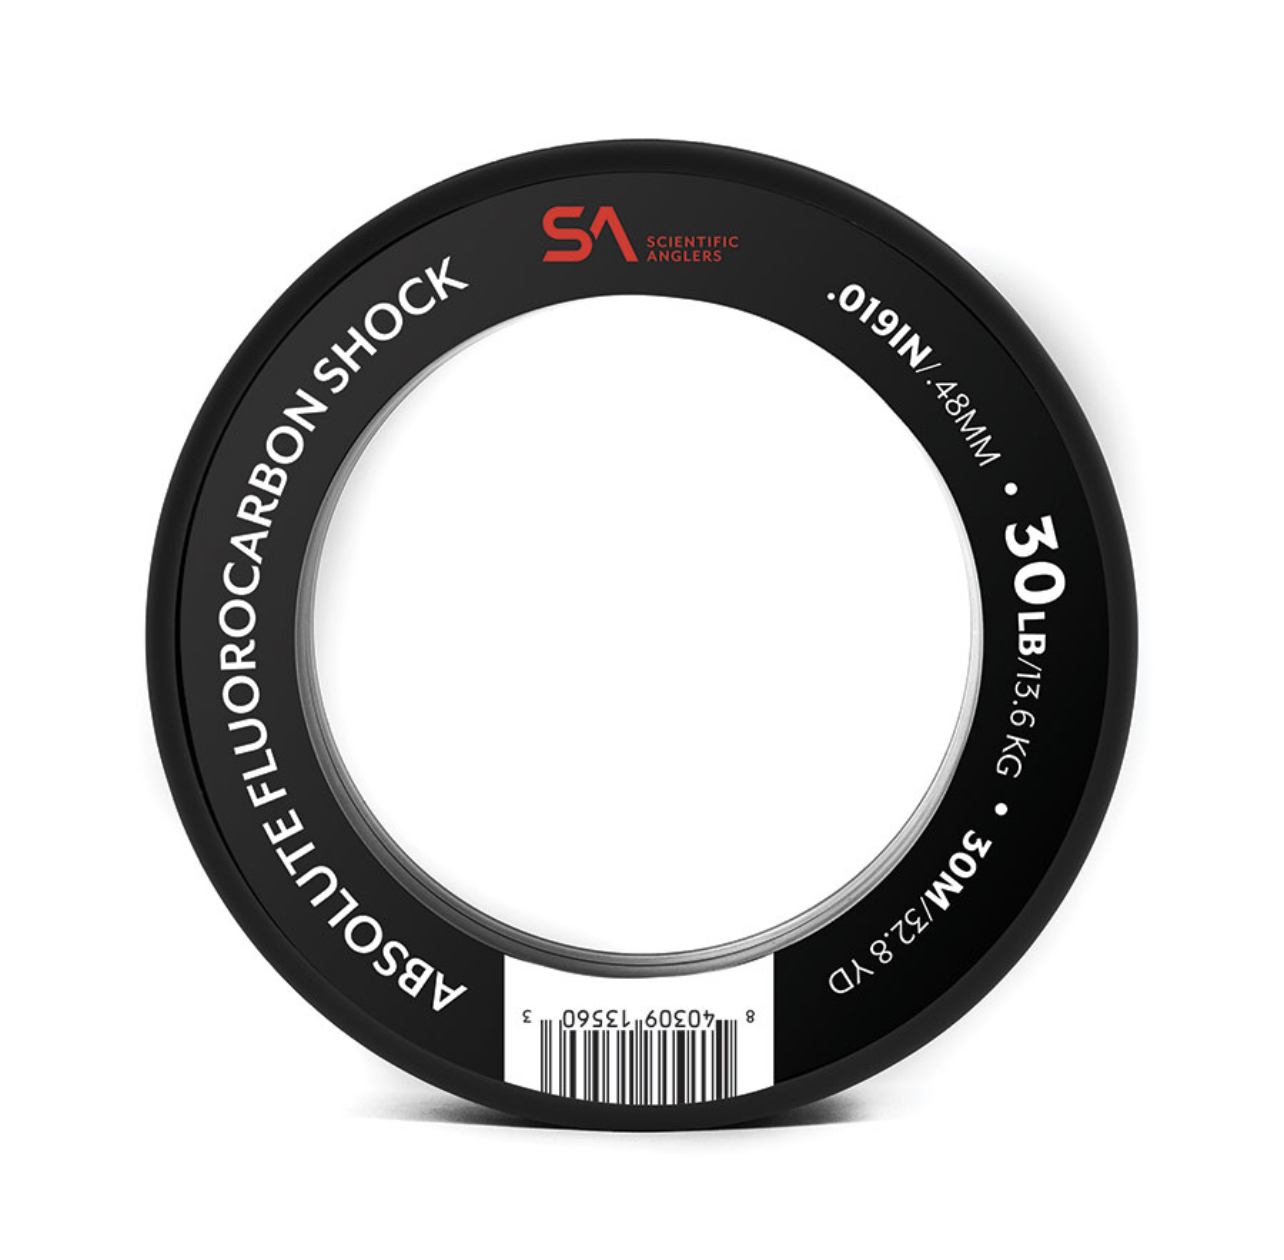 Absolute Fluorocarbon Shock